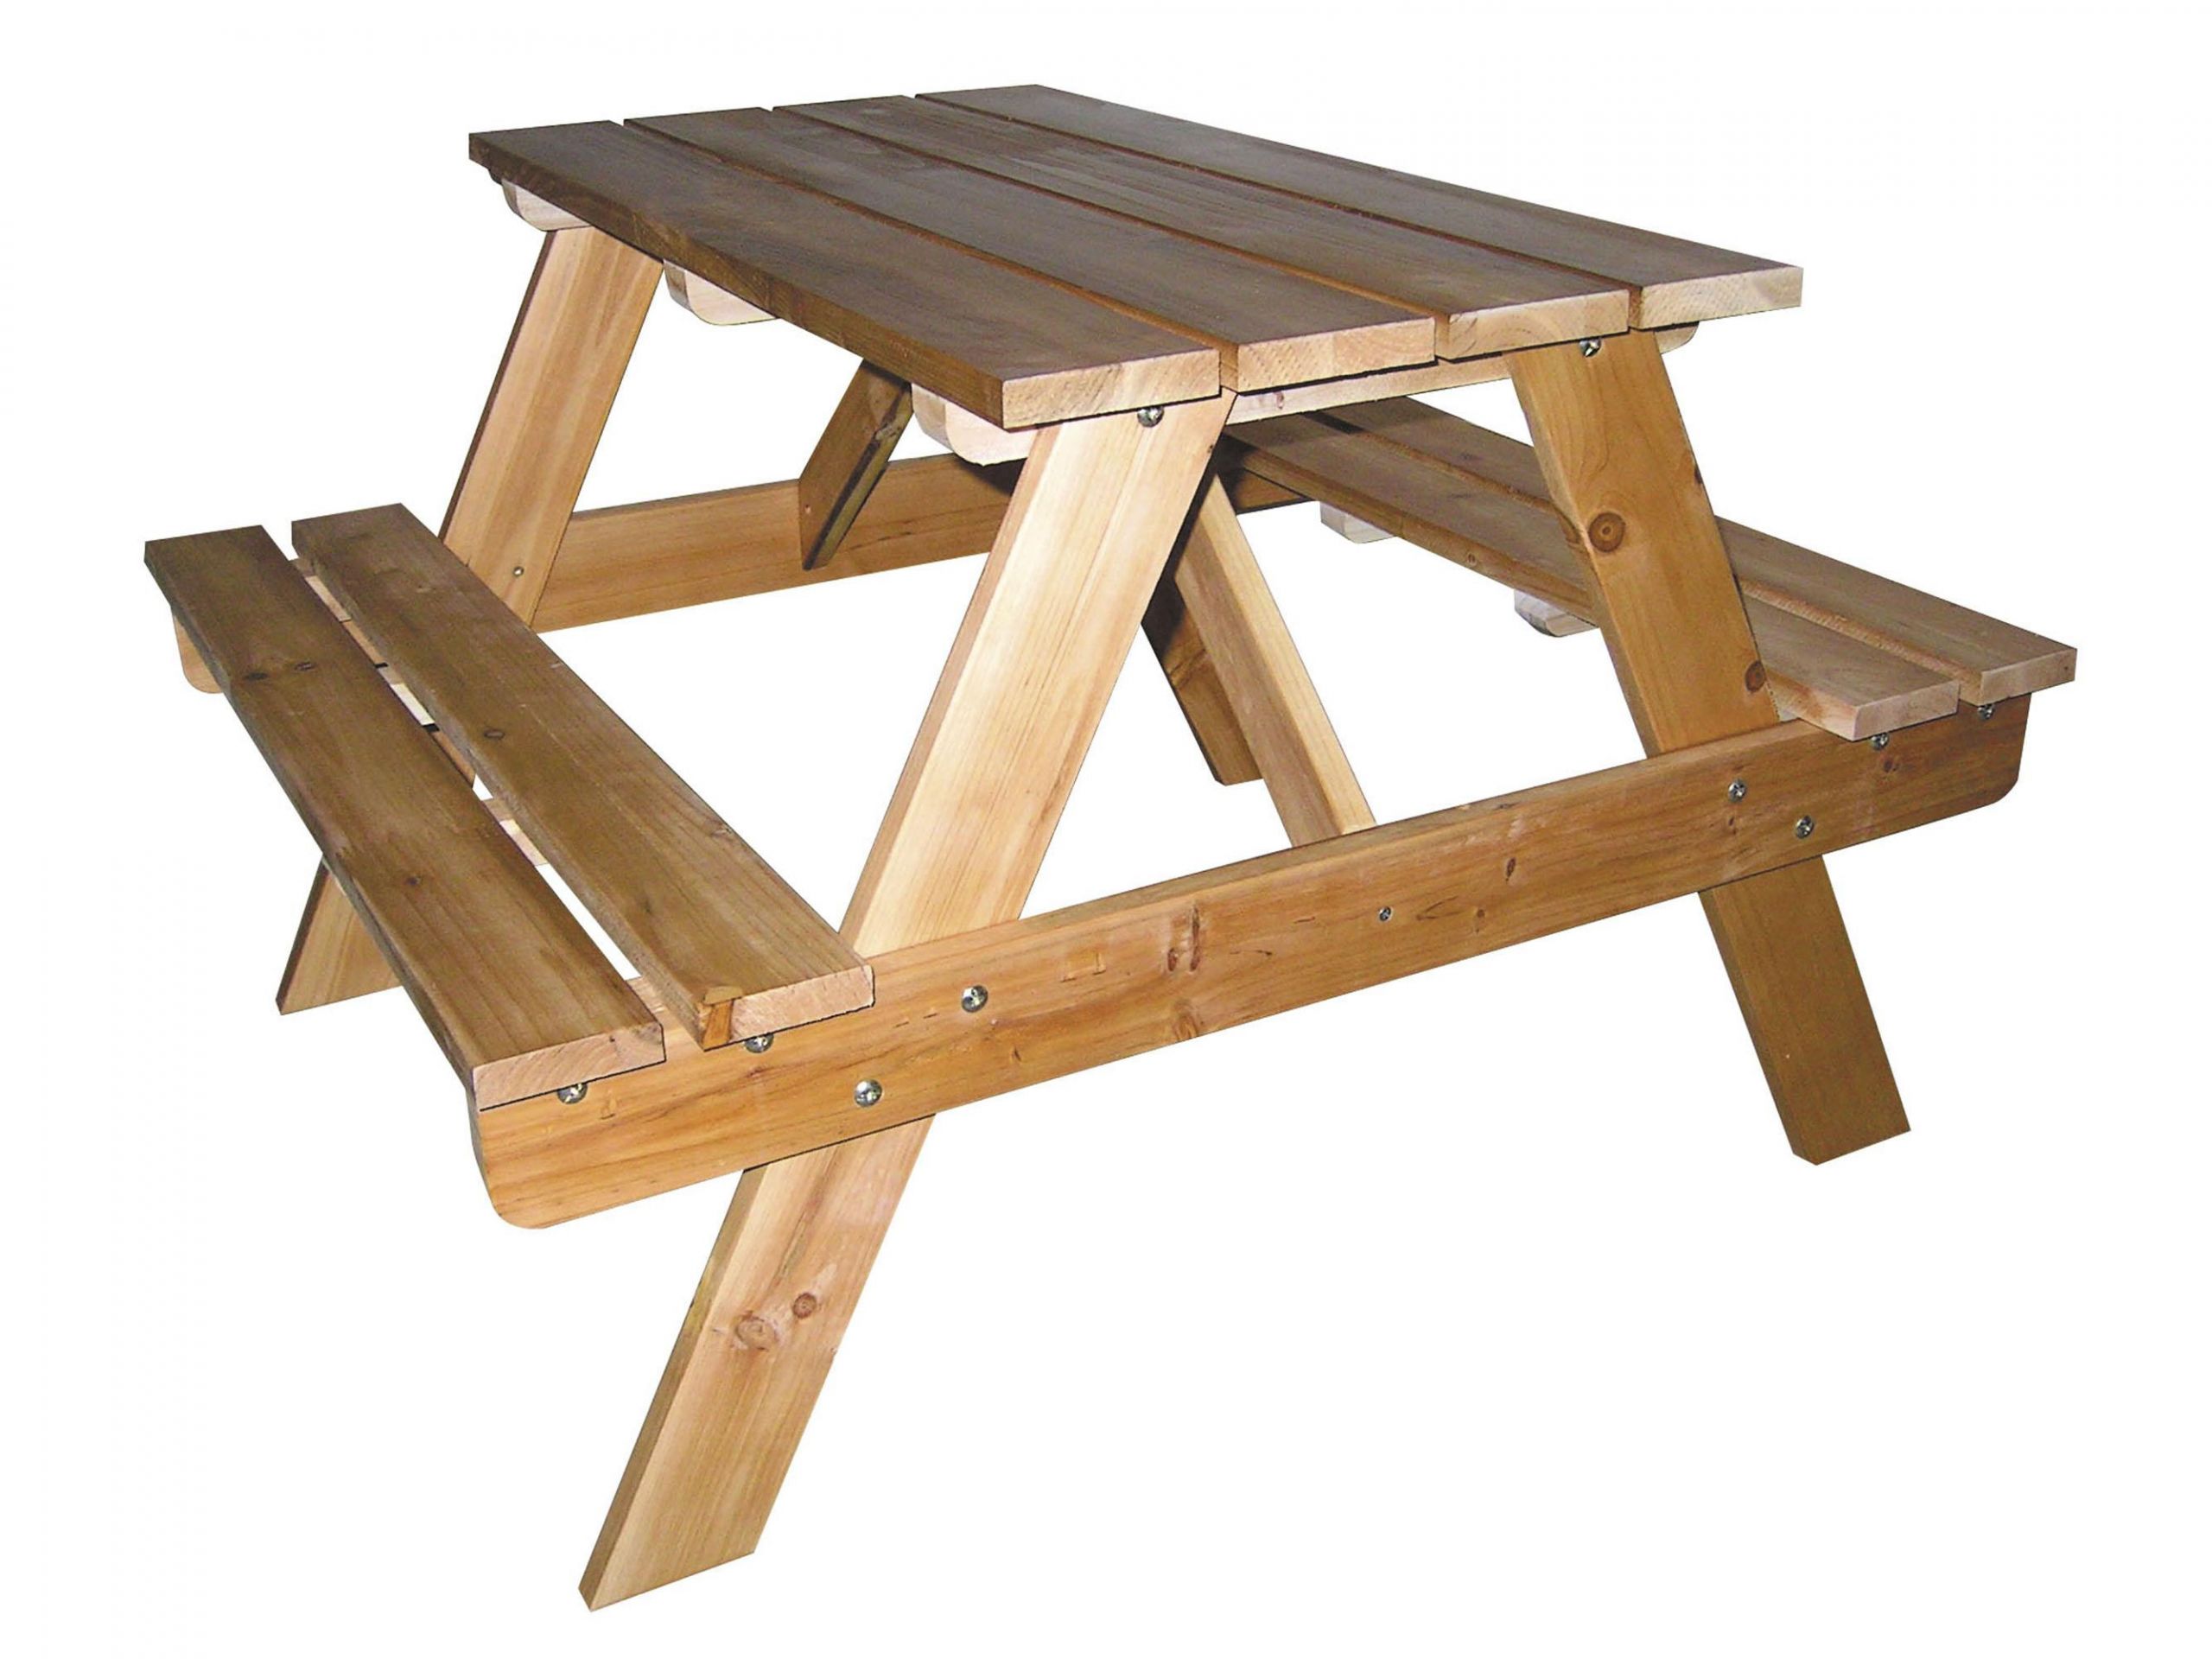 Picnic Table For Kids
 ORE International Kids Indoor Outdoor Picnic Table by OJ